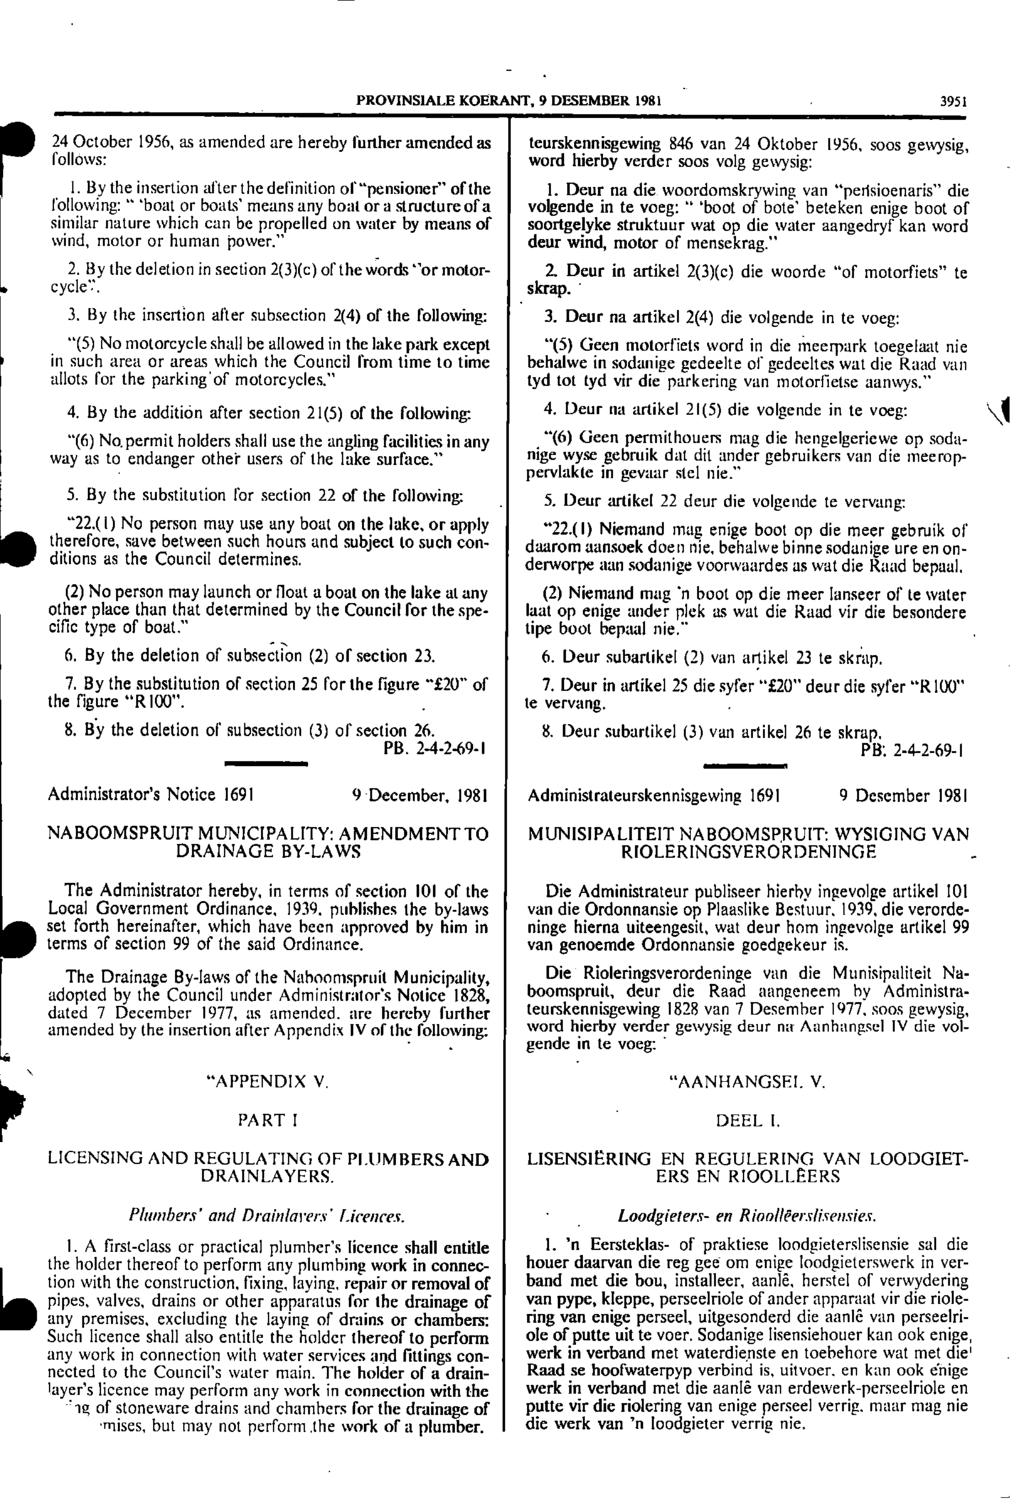 PROVINSIALE KOERANT, 9 DESEMBER 1981 3951 ID 24 October 1956, as amended are hereby further amended as follows: I By the insertion after the definition of "pensioner" of the following: "boat or boats